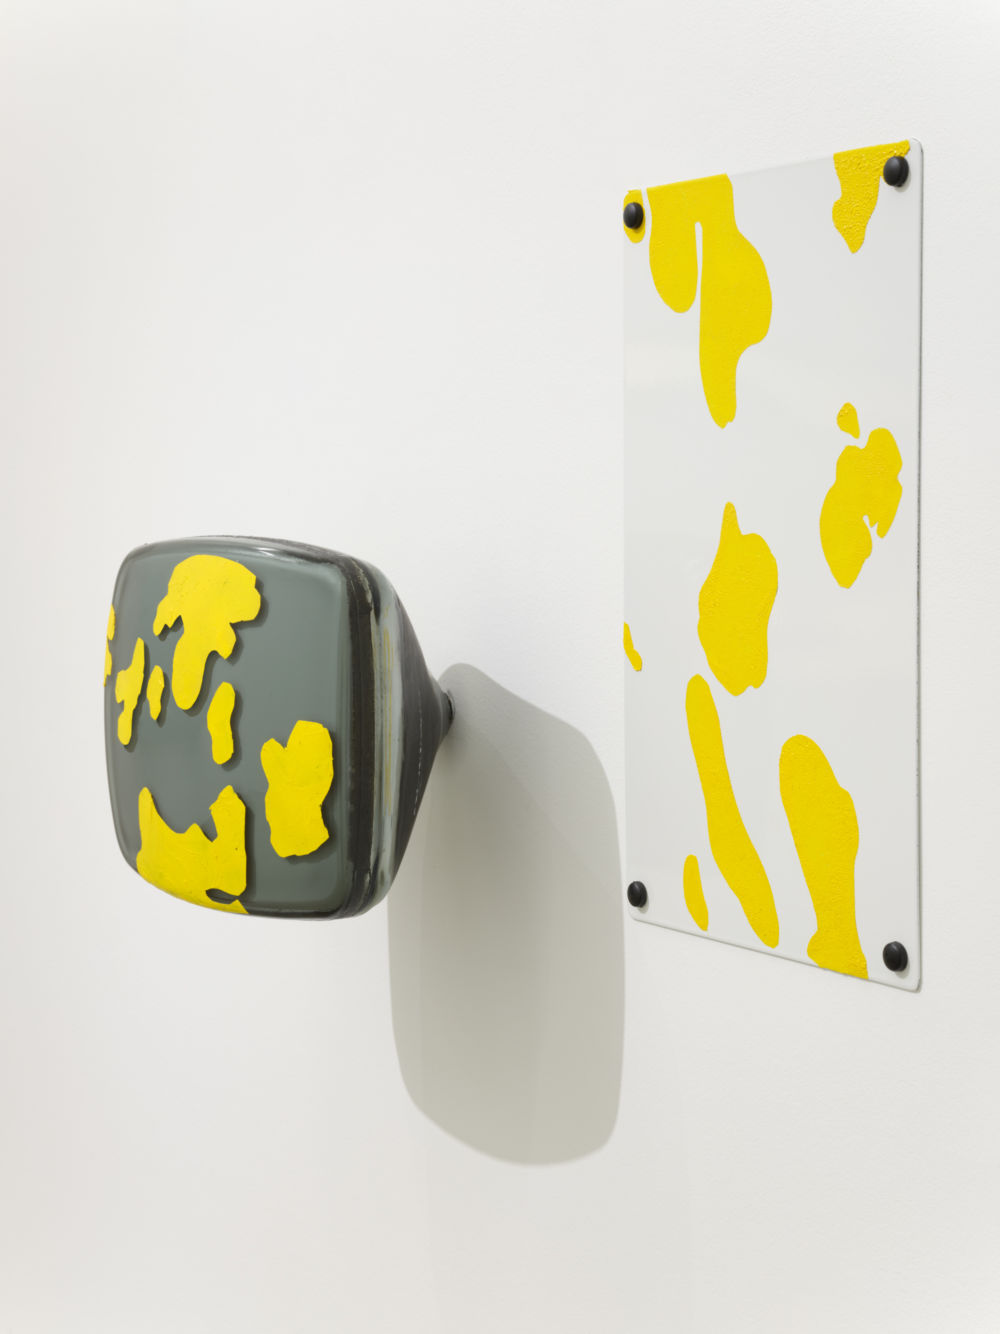 ​Jerry Pethick, Through the Trees (Walnut), 1994–95, enamelled steel, silicone, TV tube, aluminum, steel nails, 17 x 22 1/2 x 7 1/2 in. (43 x 57 x 19 cm) by 